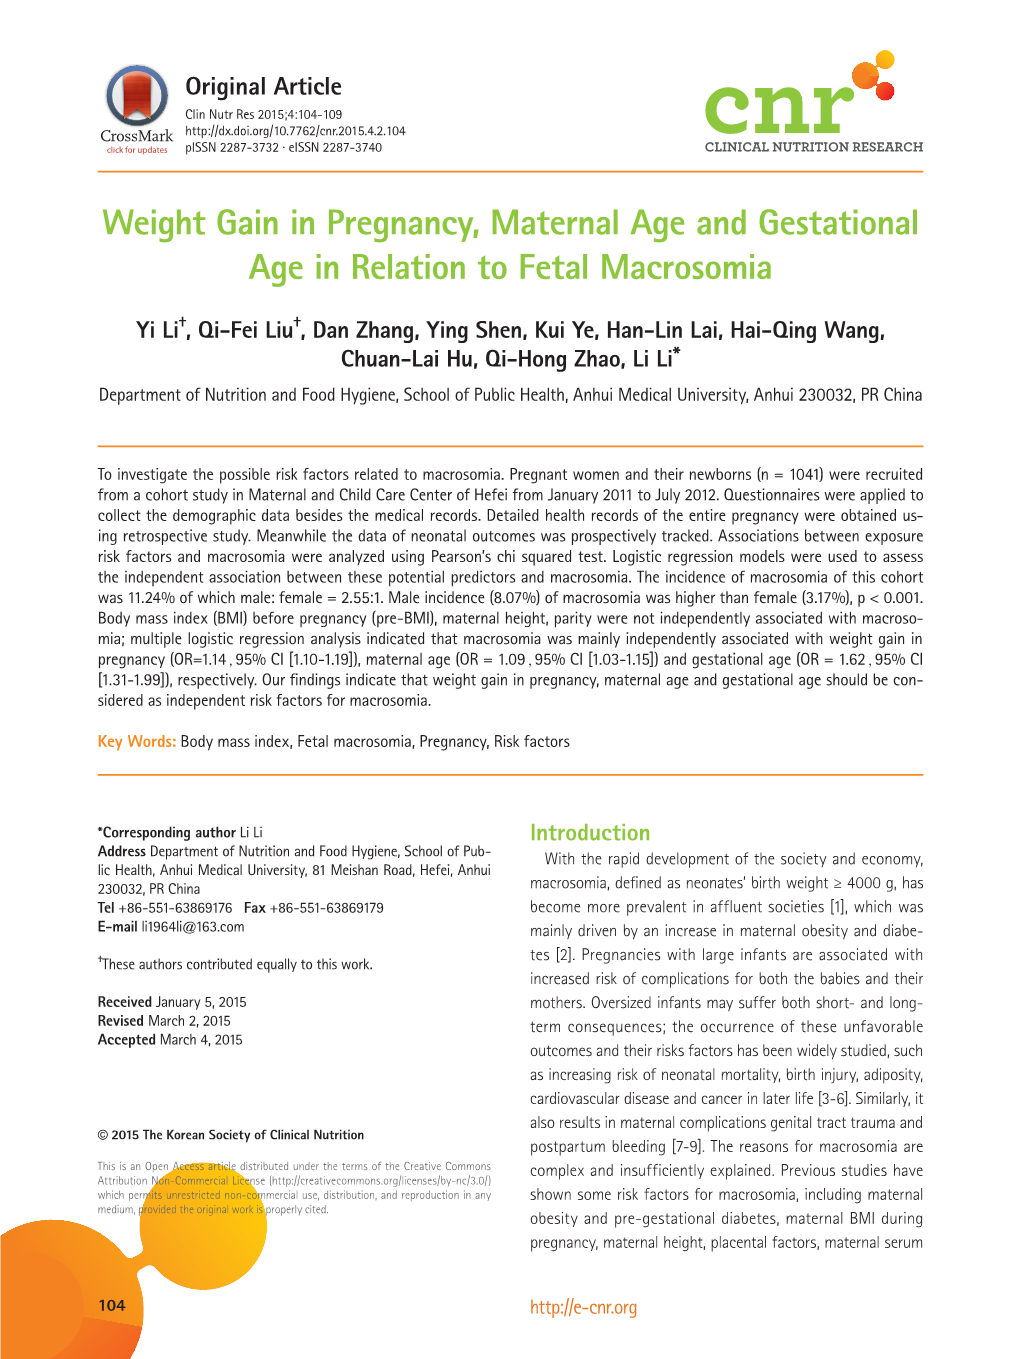 Weight Gain in Pregnancy, Maternal Age and Gestational Age in Relation to Fetal Macrosomia